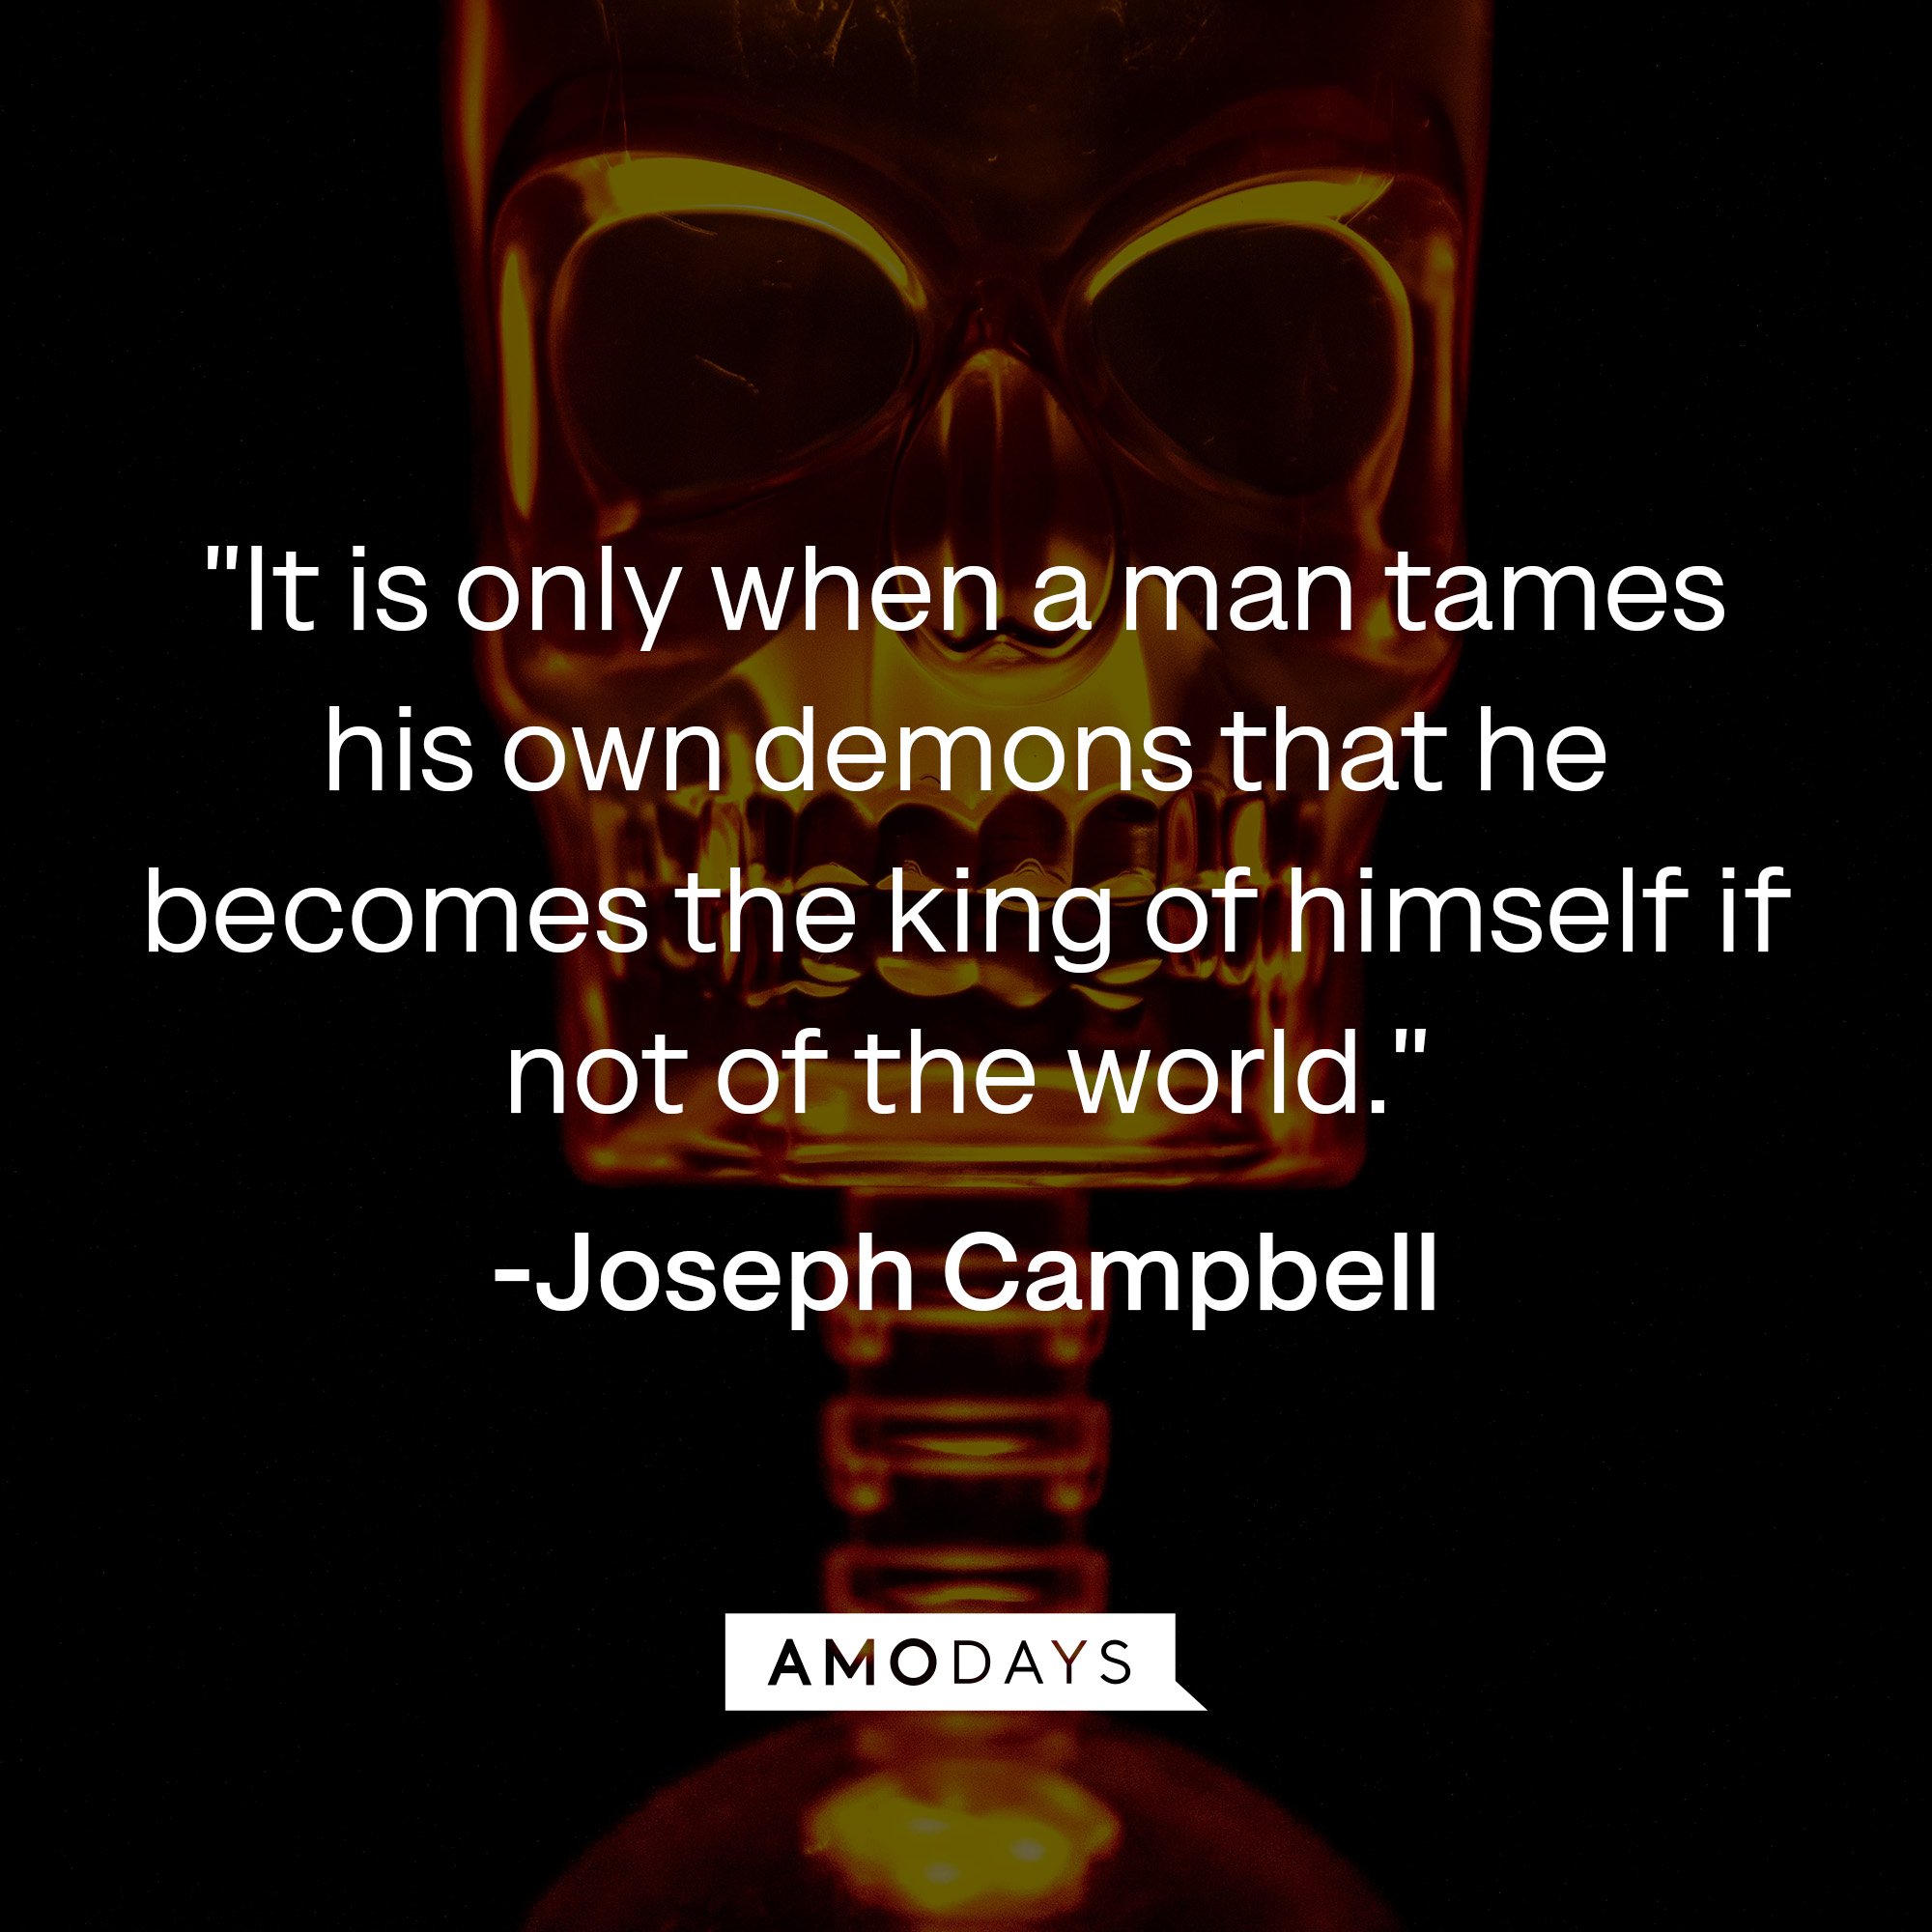 Joseph Campbell’s quote: "It is only when a man tames his own demons that he becomes the king of himself if not of the world." | Image: AmoDays